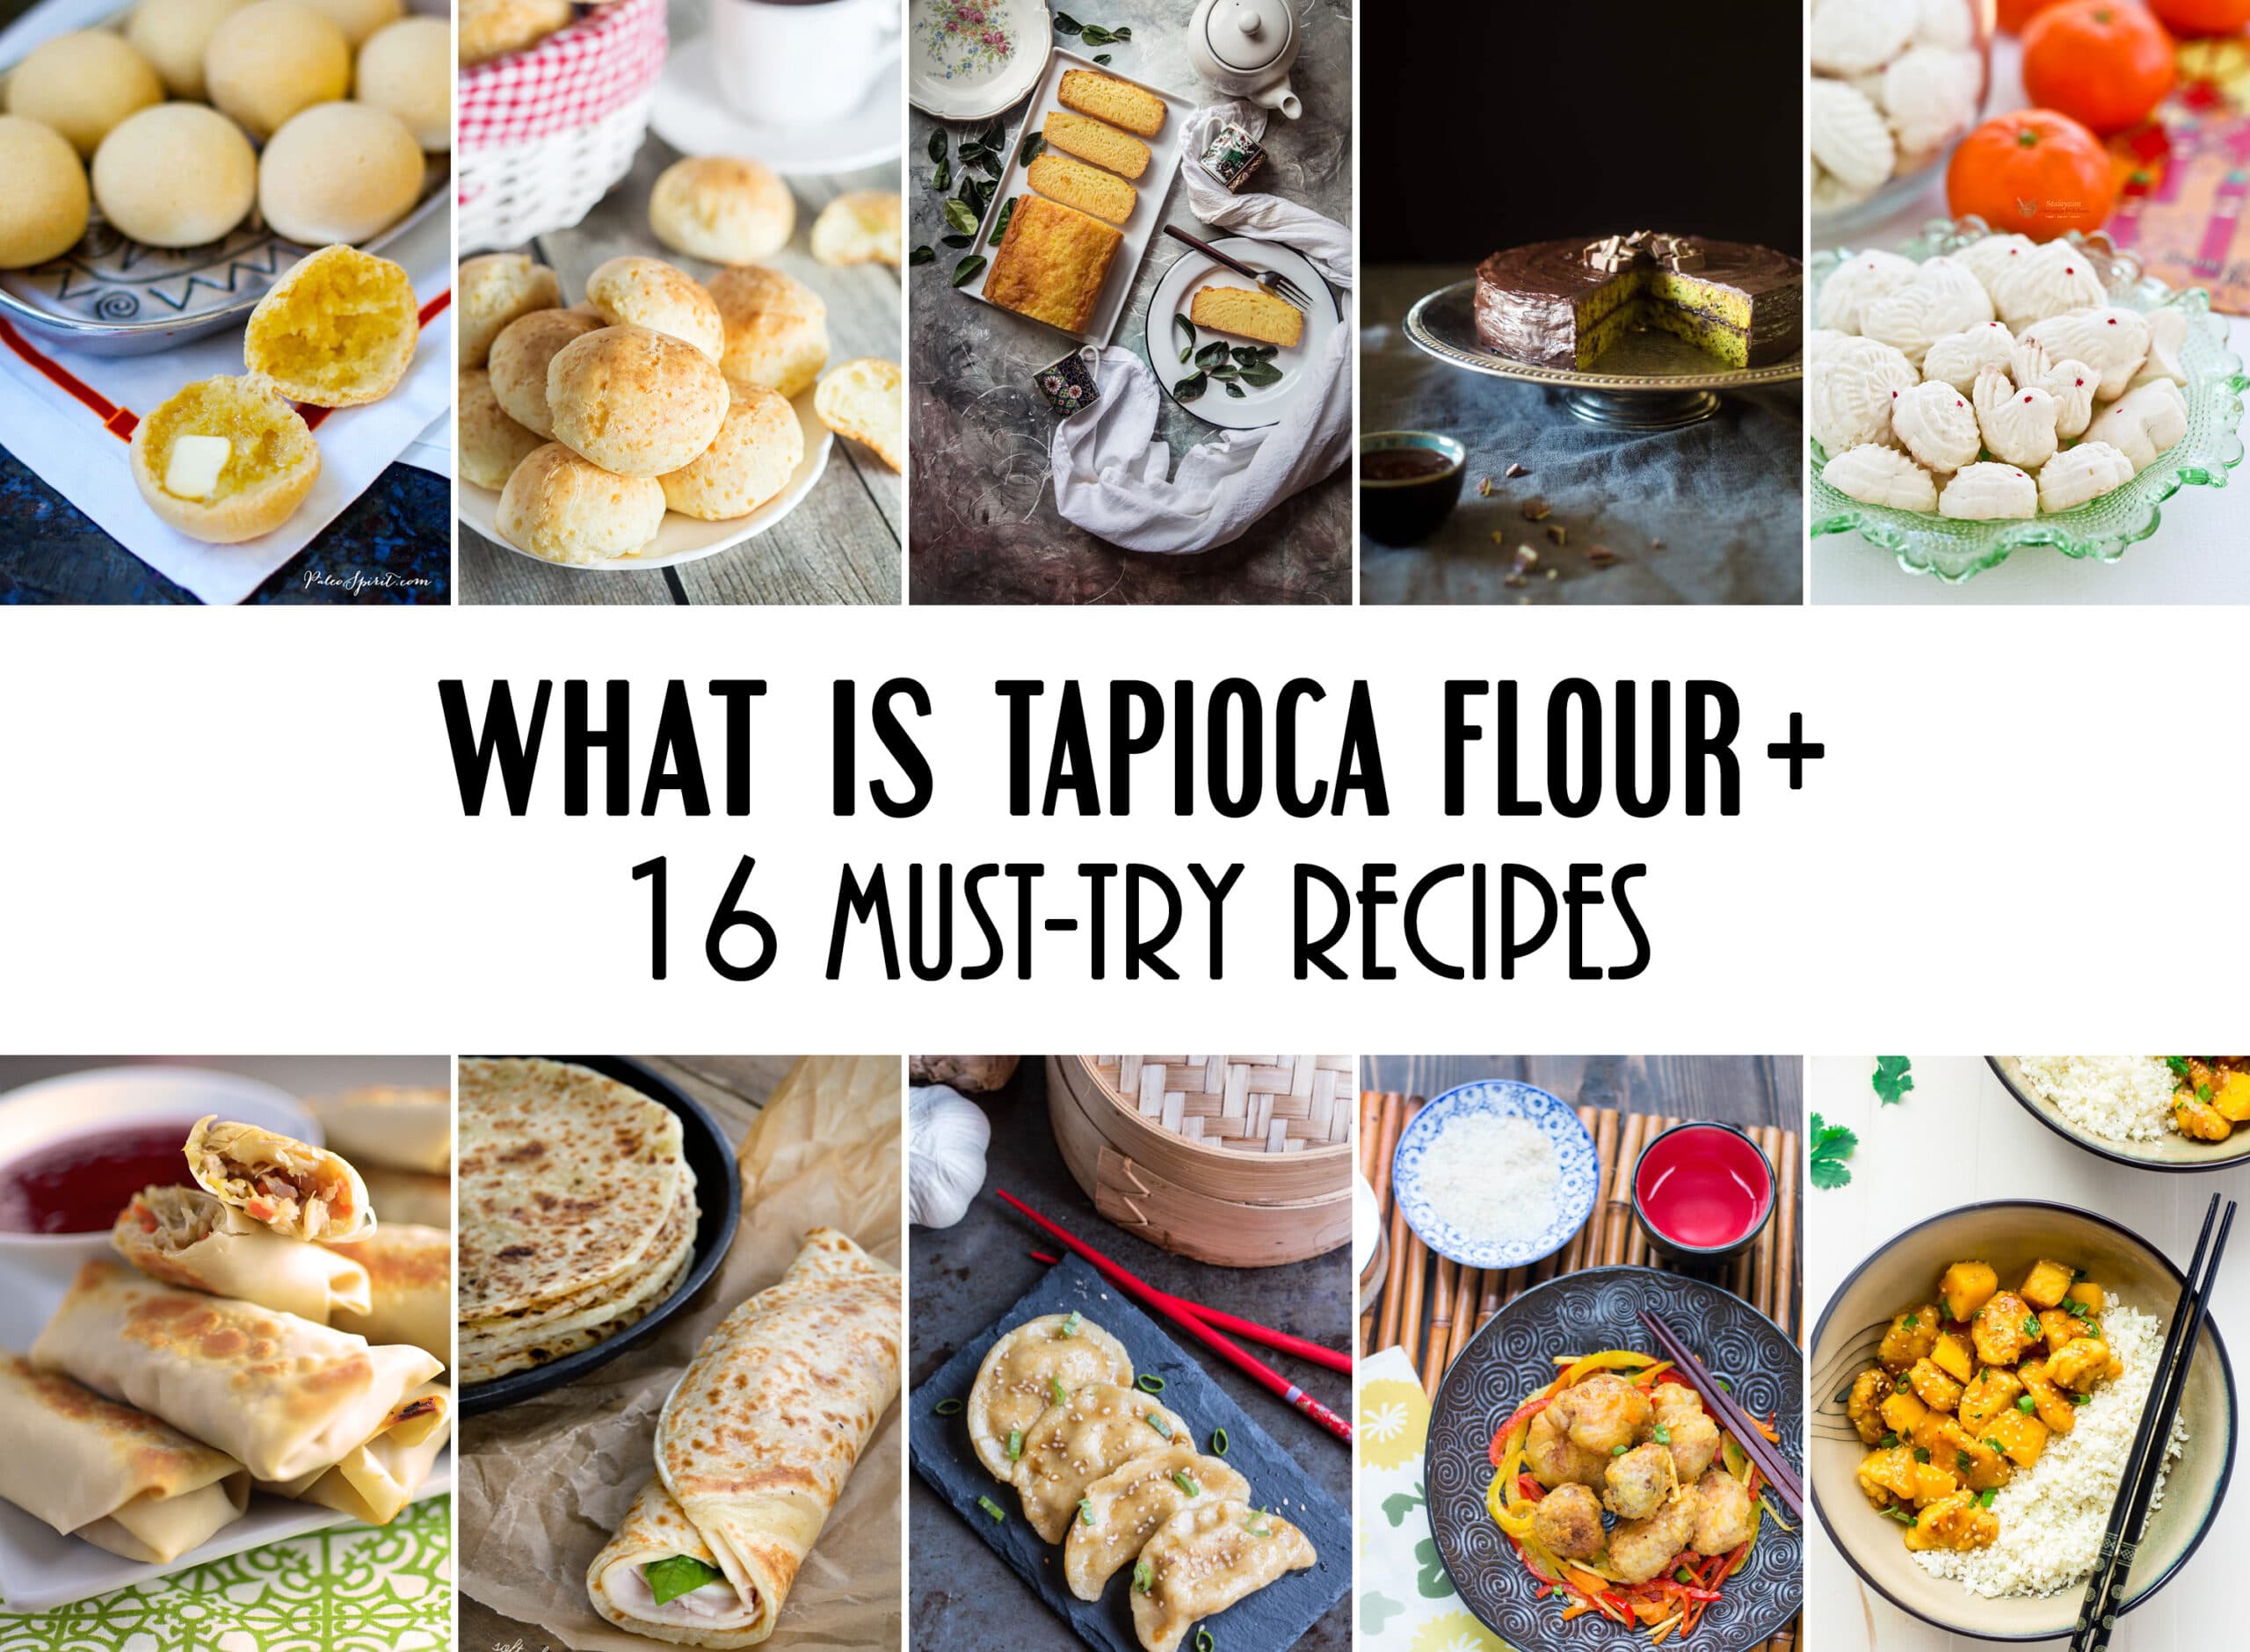 5 Delicious Tapioca Root Recipes For You To Try At Home